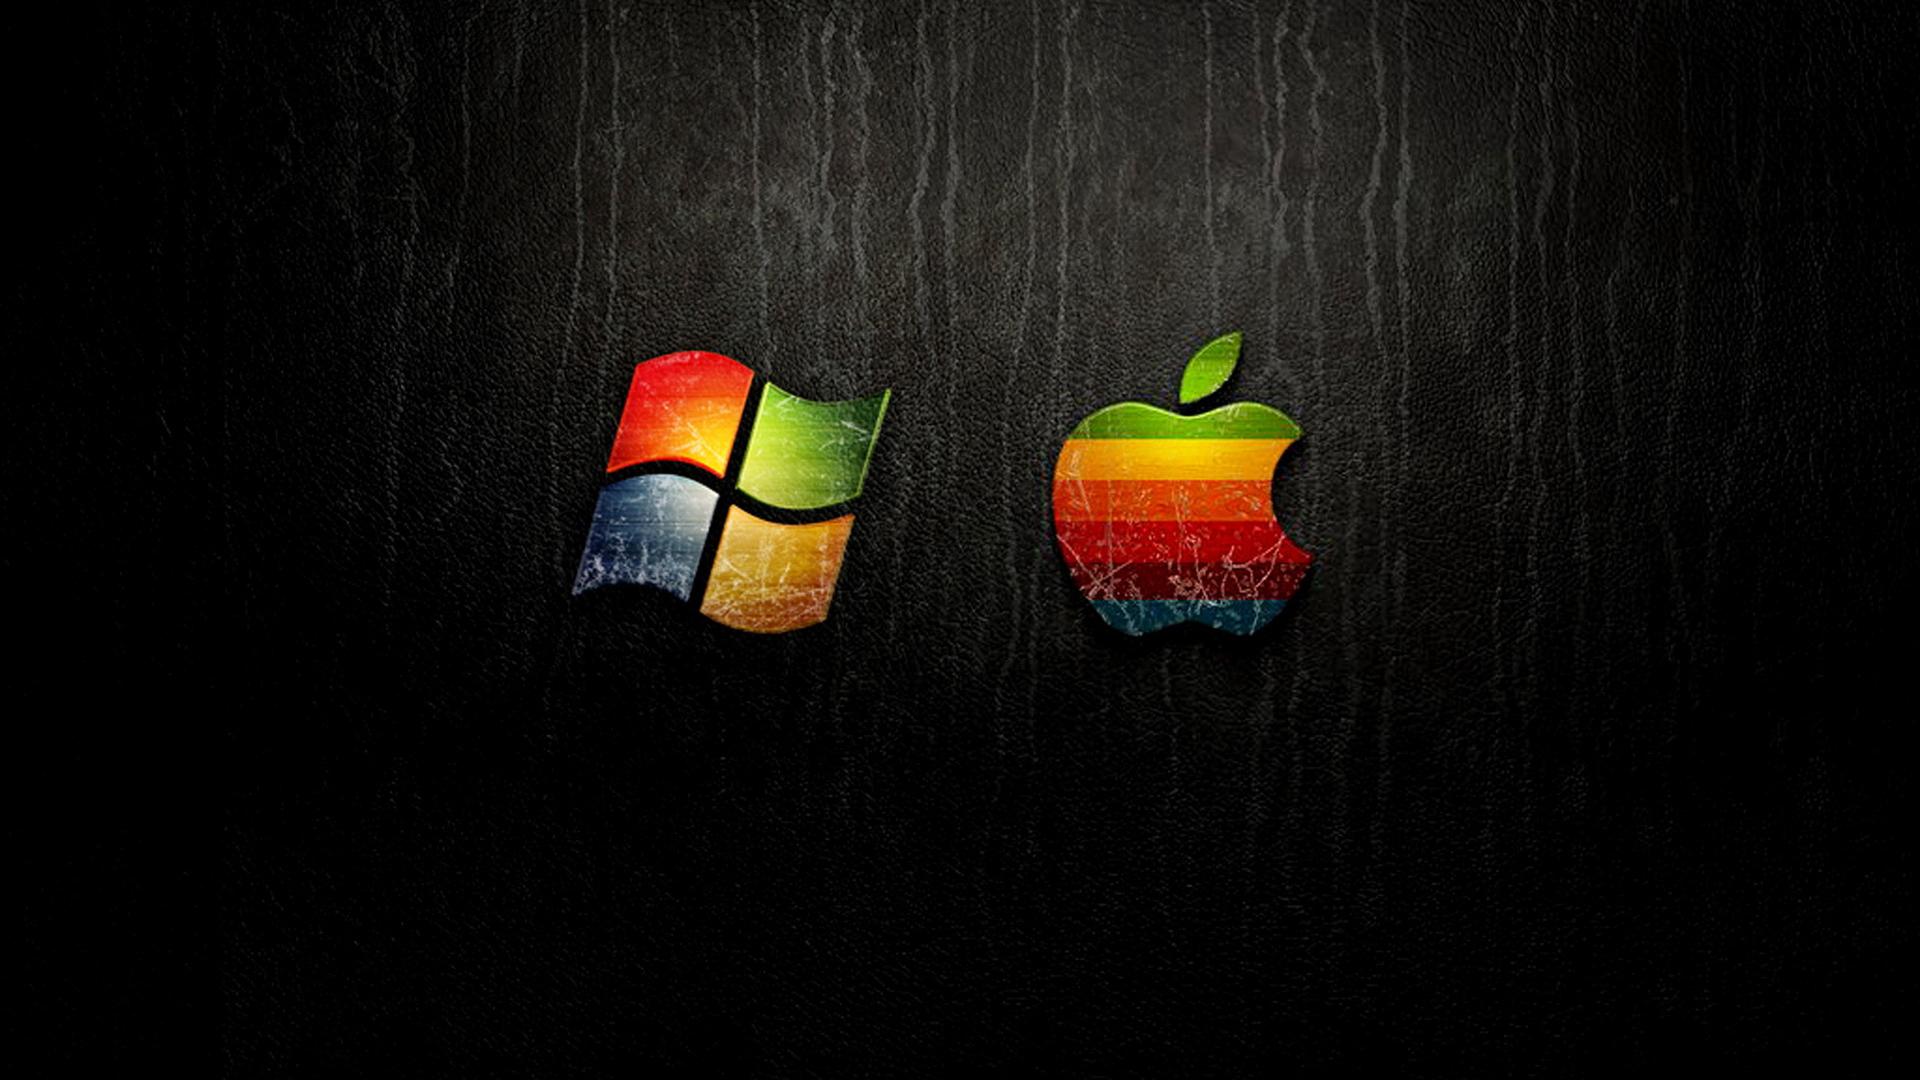 HD Colorful Windows And Apple Wallpaper Background Imagebank